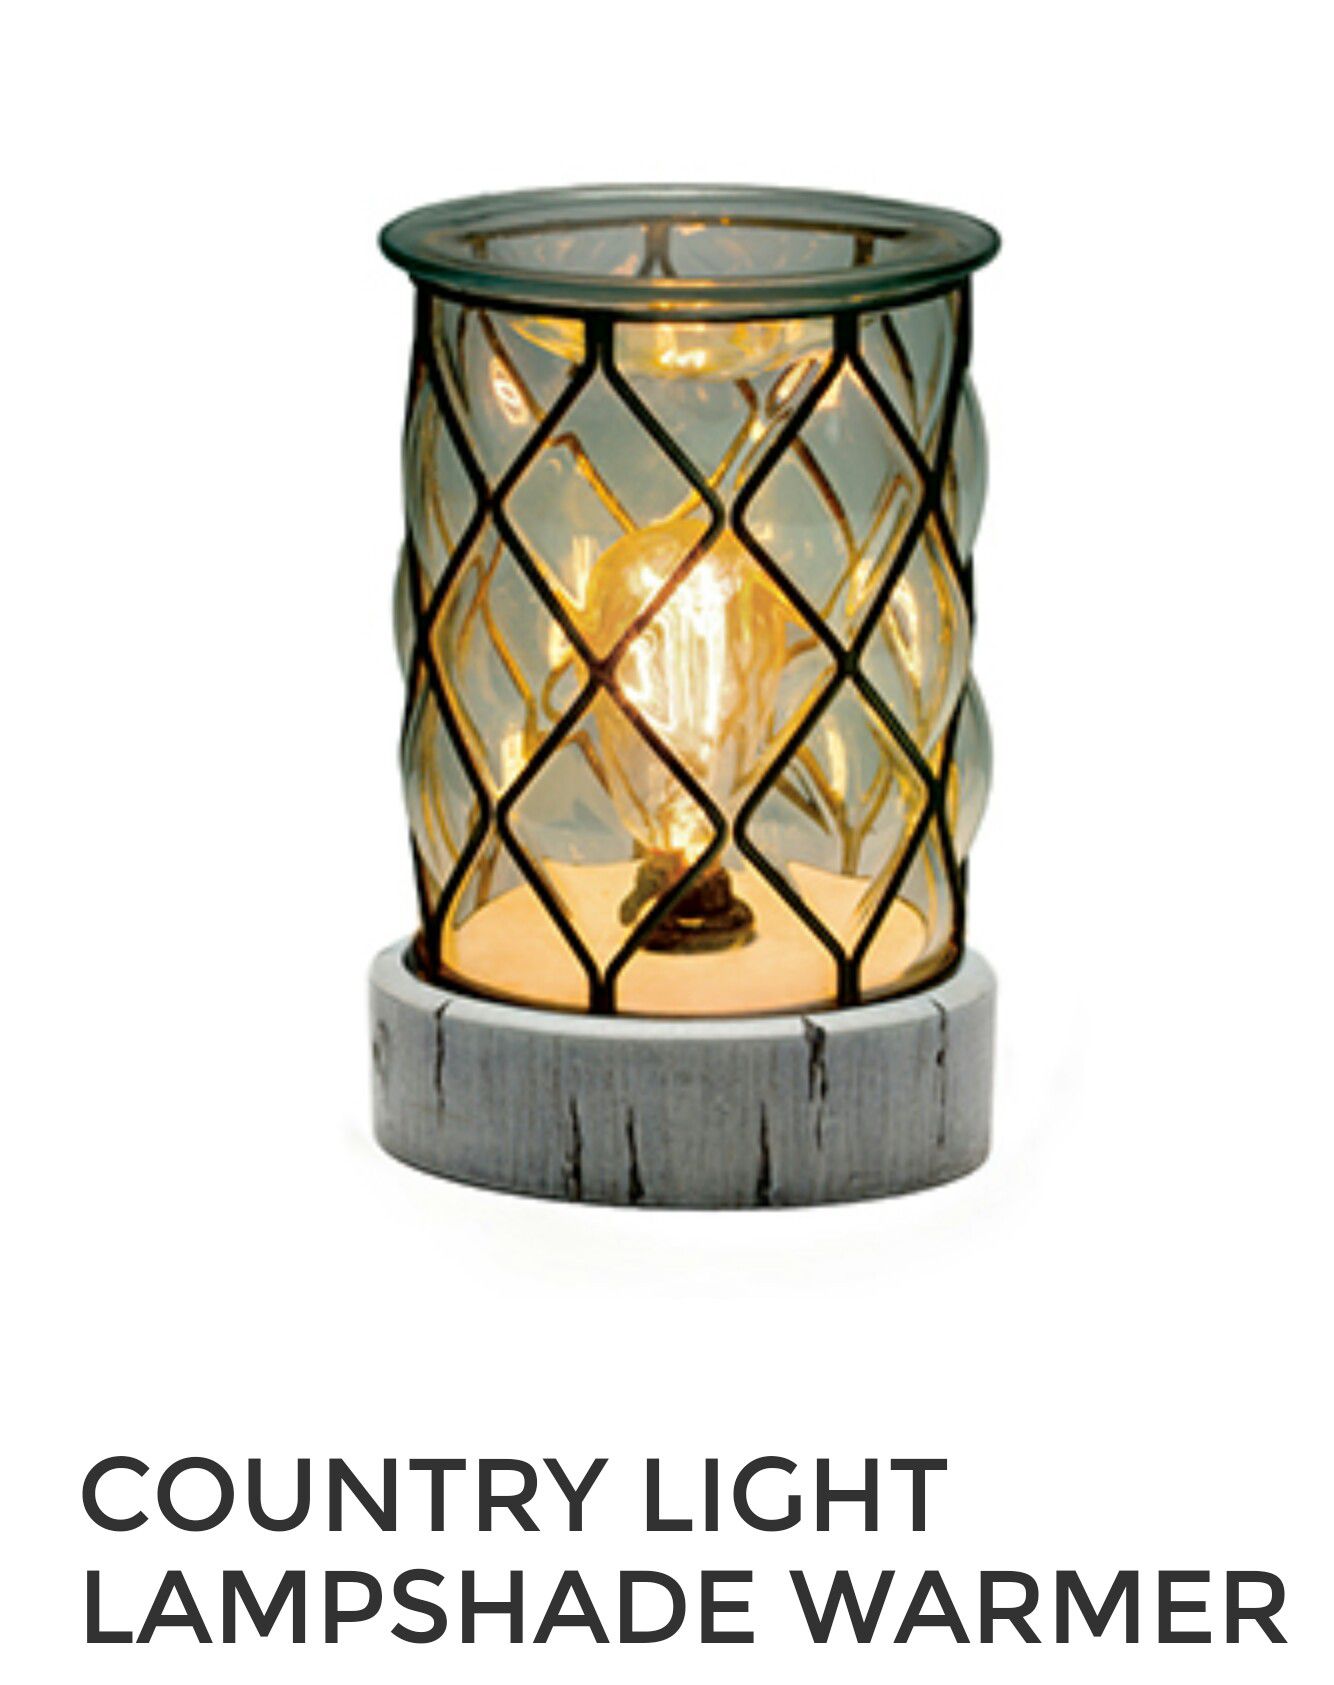 Scentsy Brand New Warmers